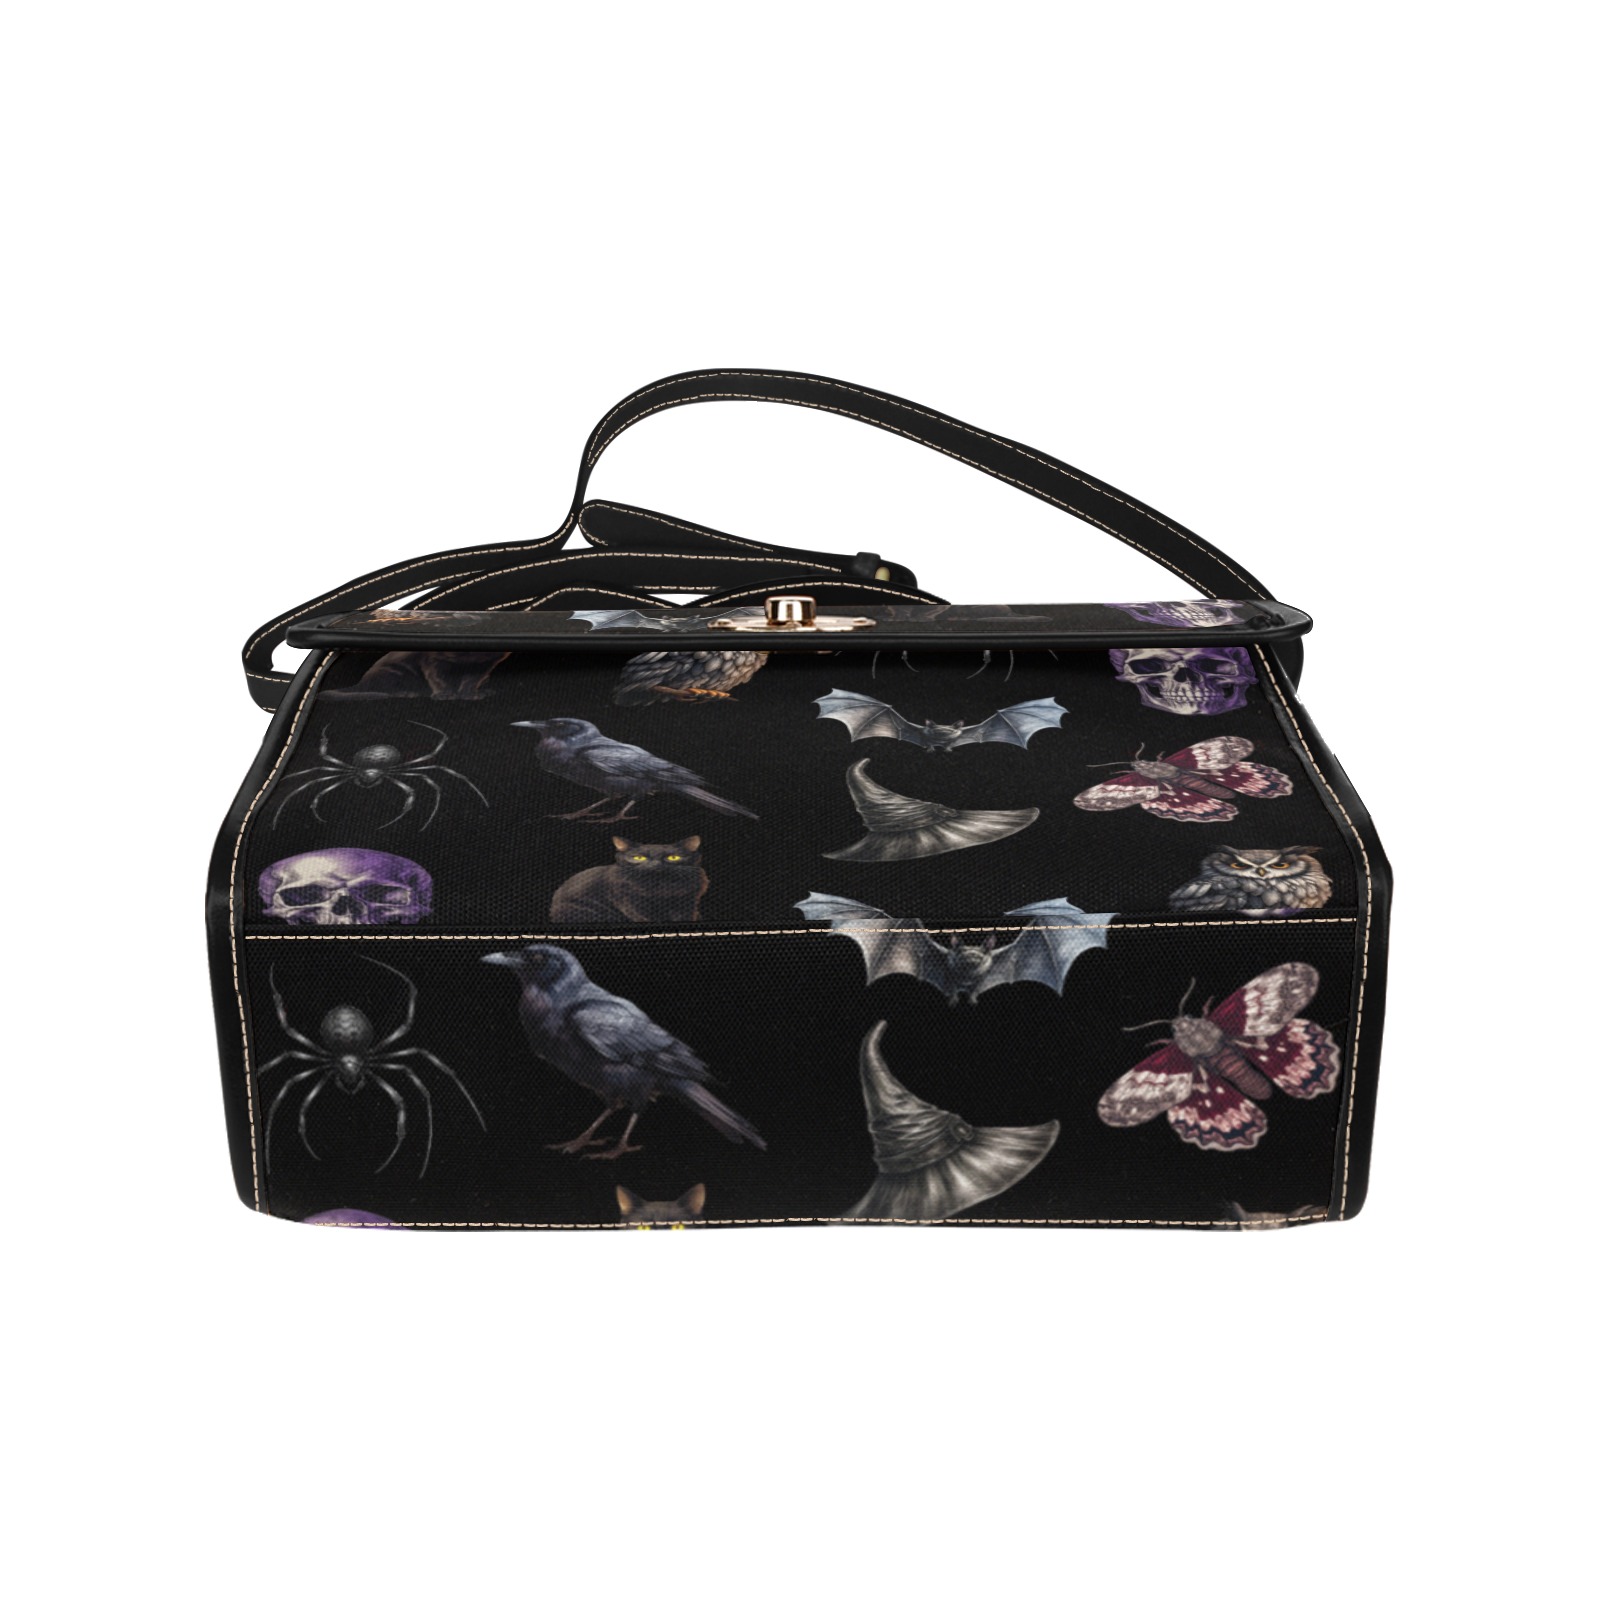 Gothic Dreams Waterproof Canvas Bag-Black (All Over Print) (Model 1641)